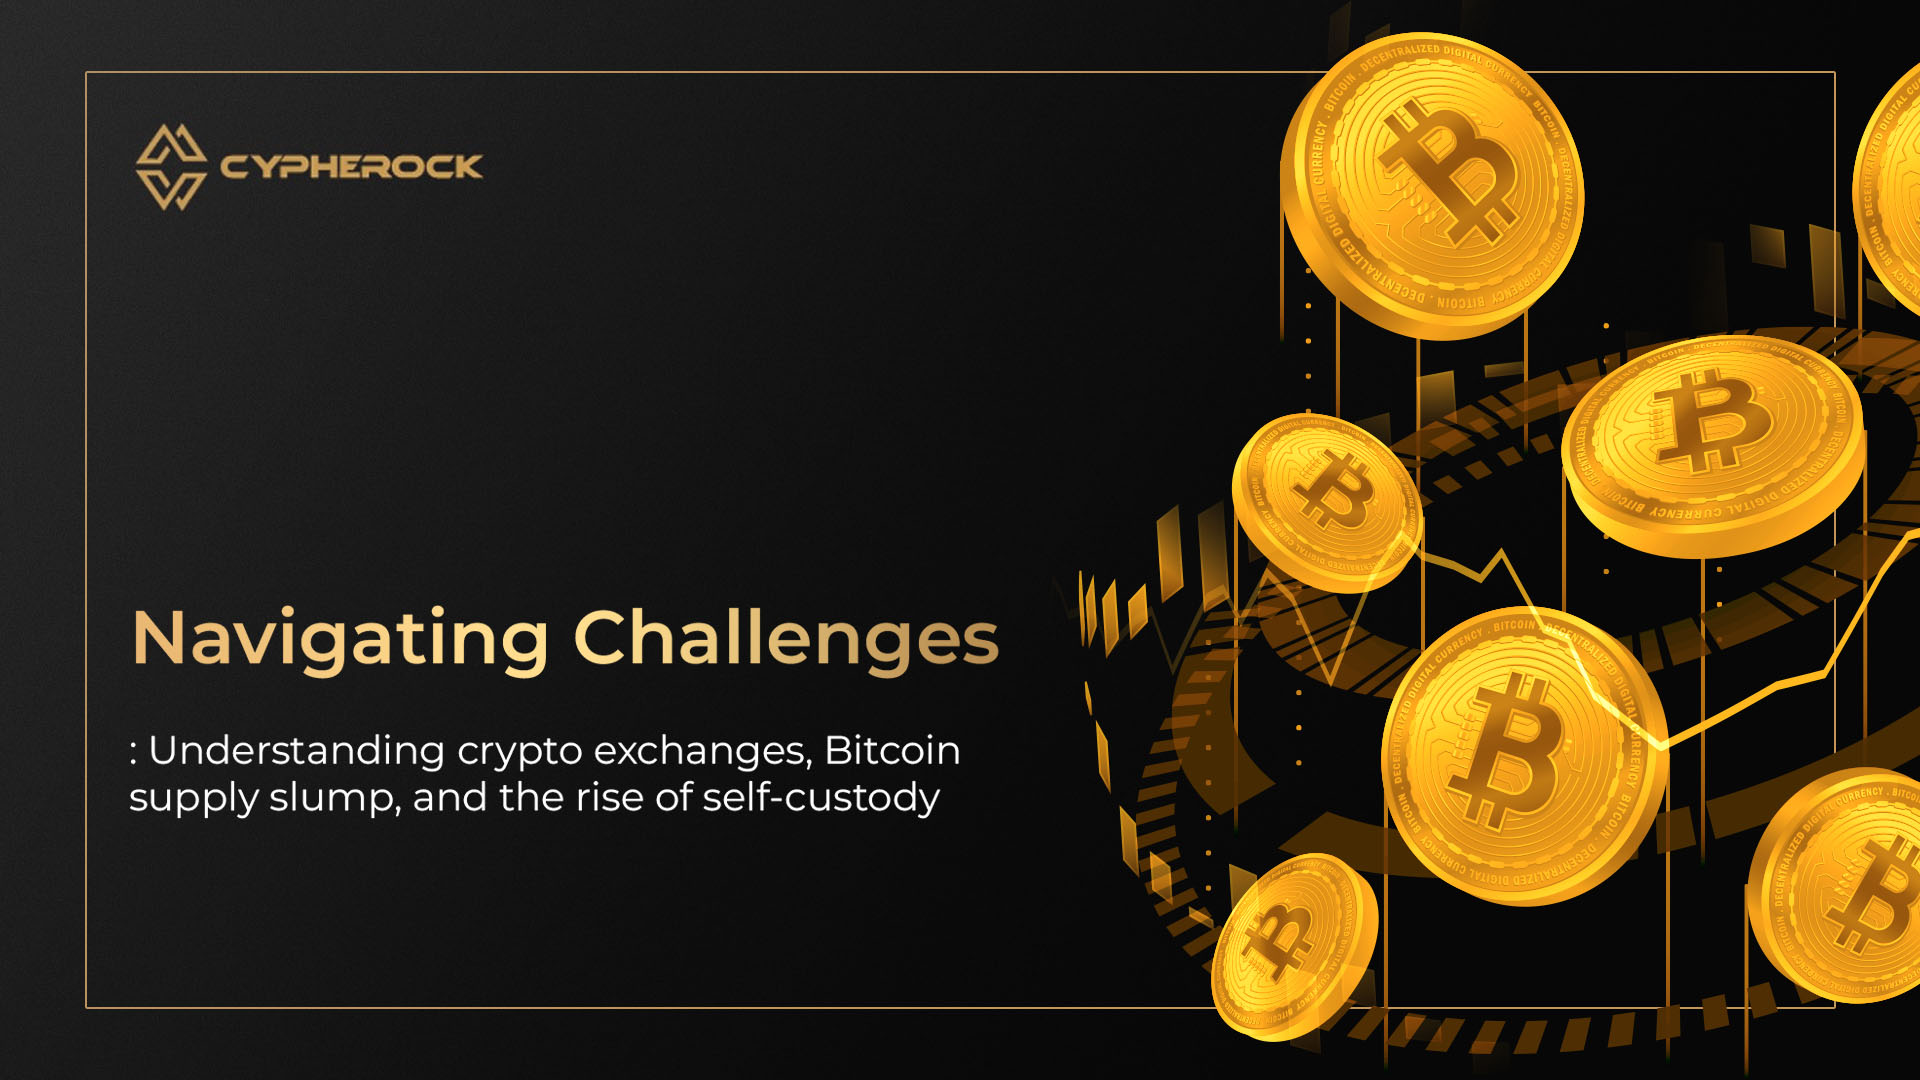 Navigating Challenges: Understanding Crypto Exchanges, Bitcoin Supply Slump, and the Rise of Self-Custody